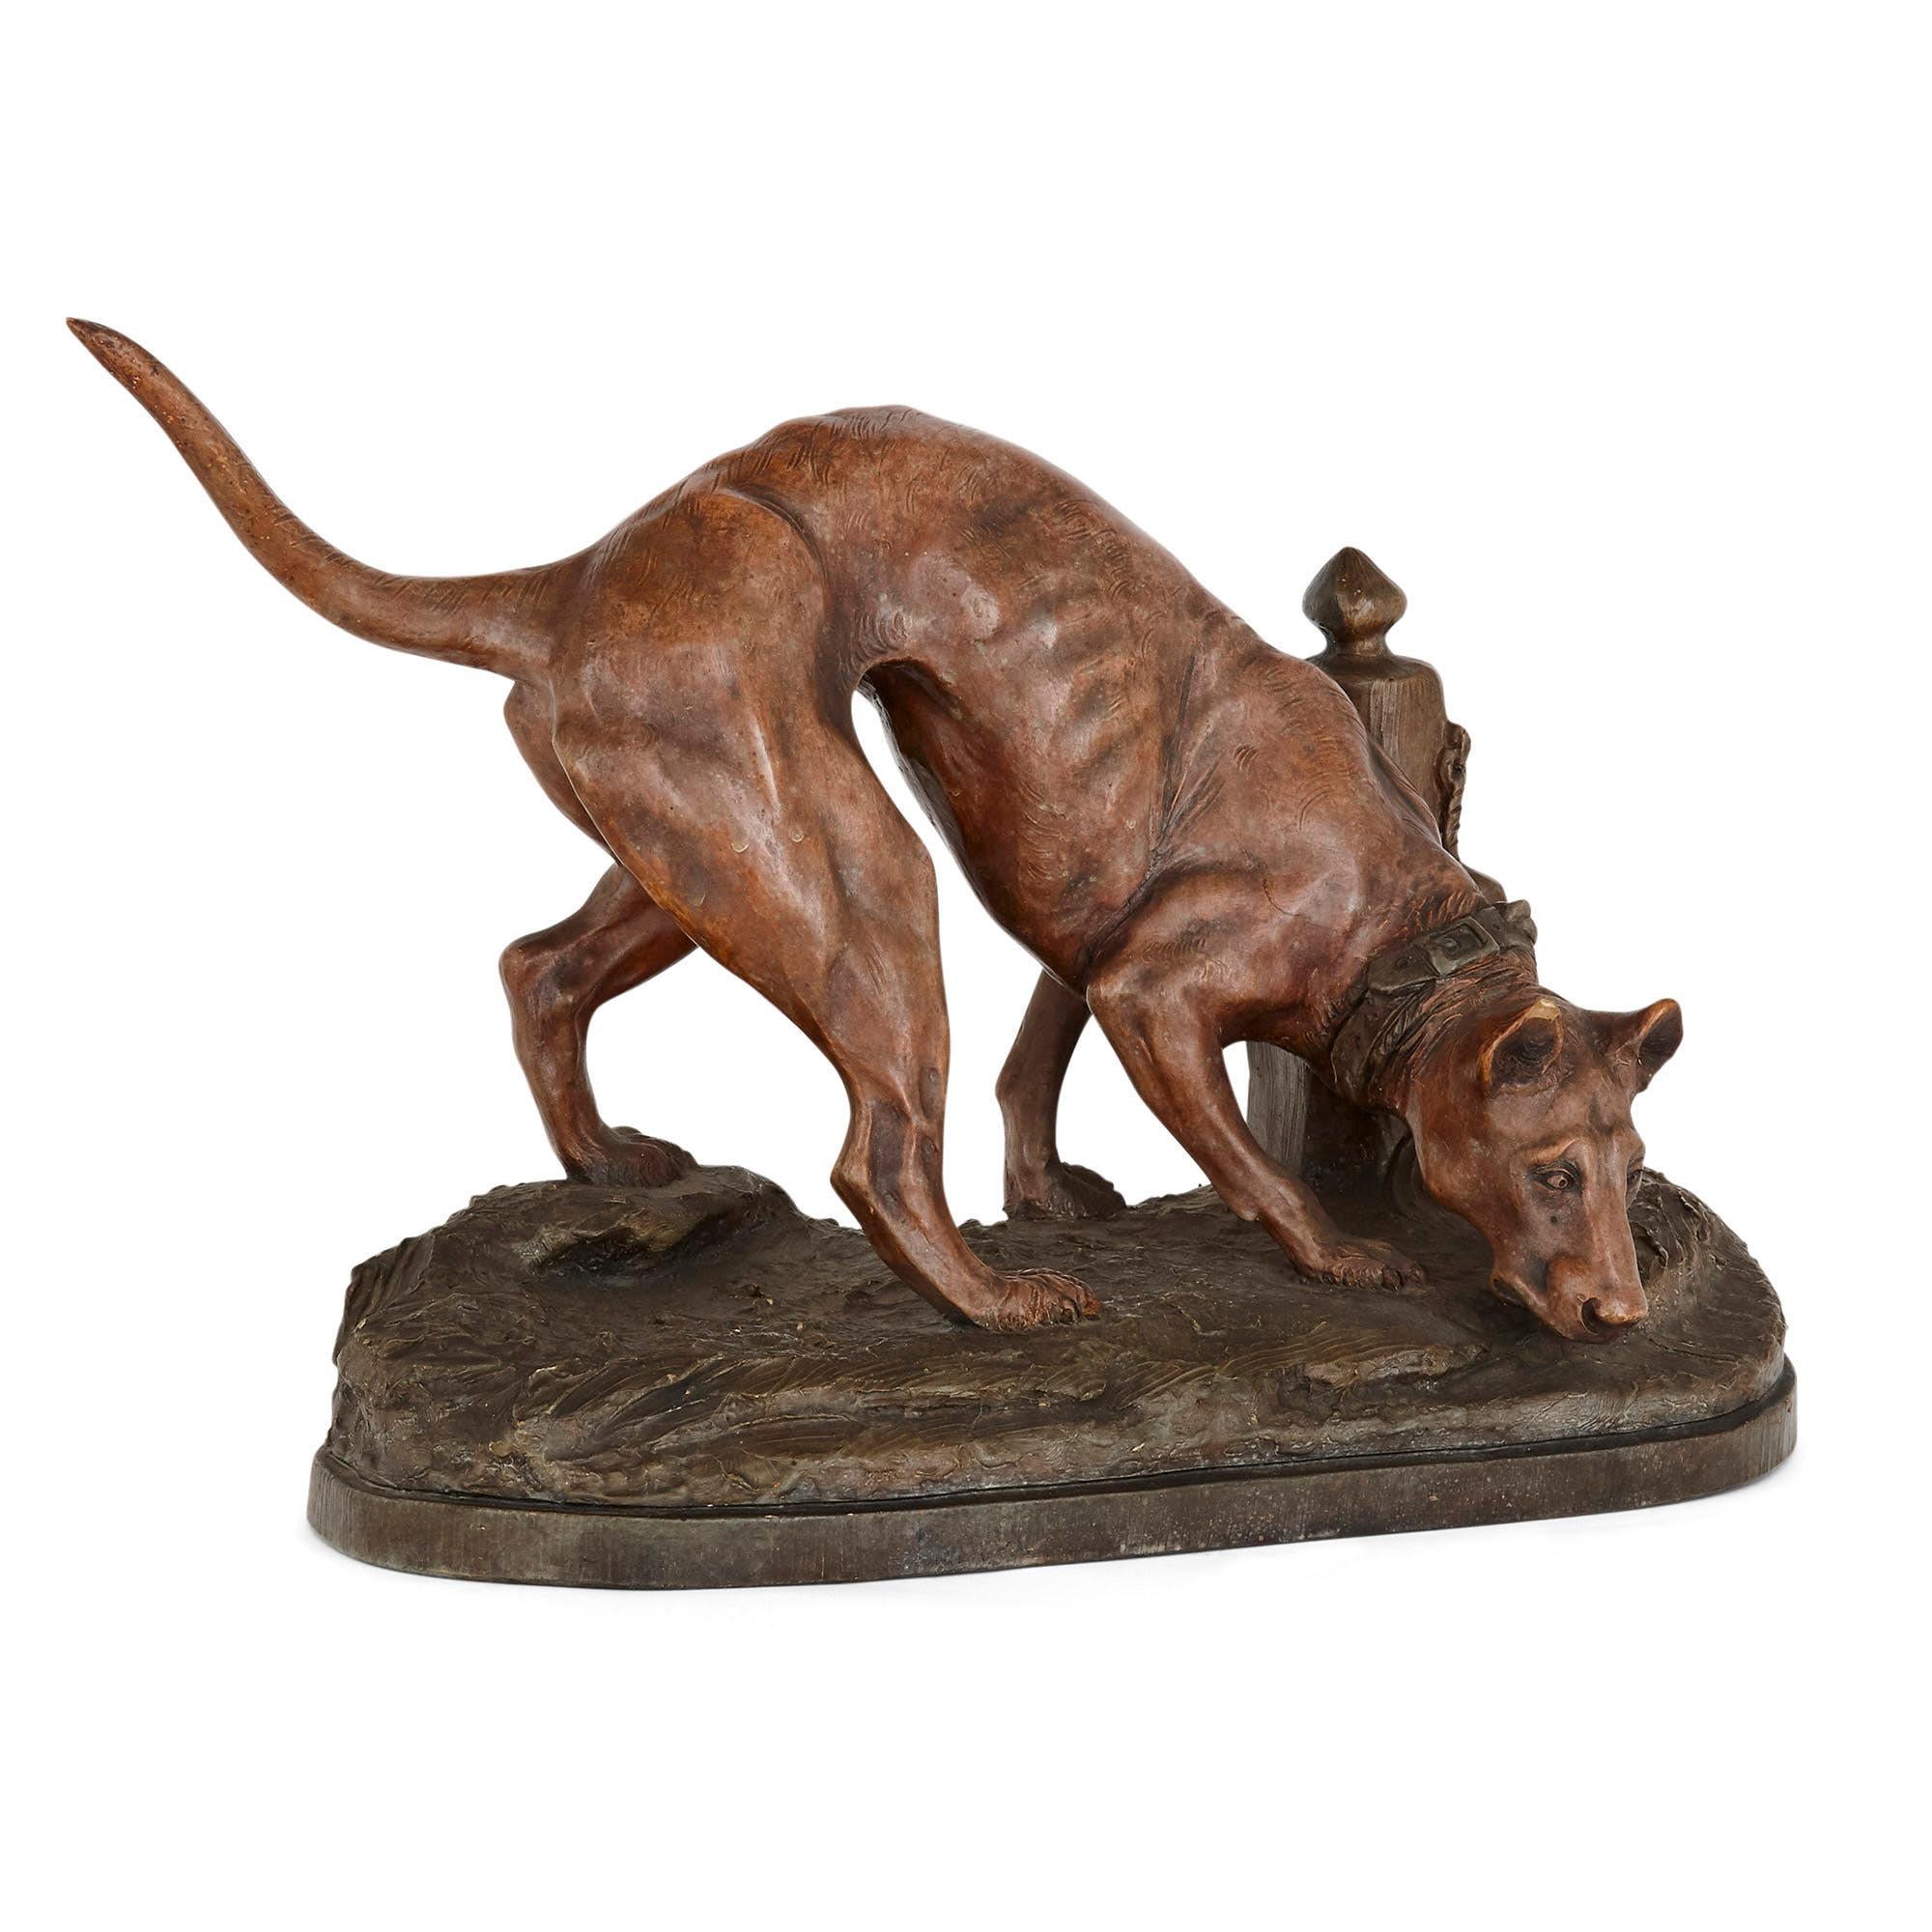 Antique 19th century terracotta model of a Hound from Belgium
Belgian, 19th century
Dimensions: Height 30cm, width 50cm, depth 19cm

This charming model depicts a dog on all fours with its face lowered towards a stream of water. He stands on top